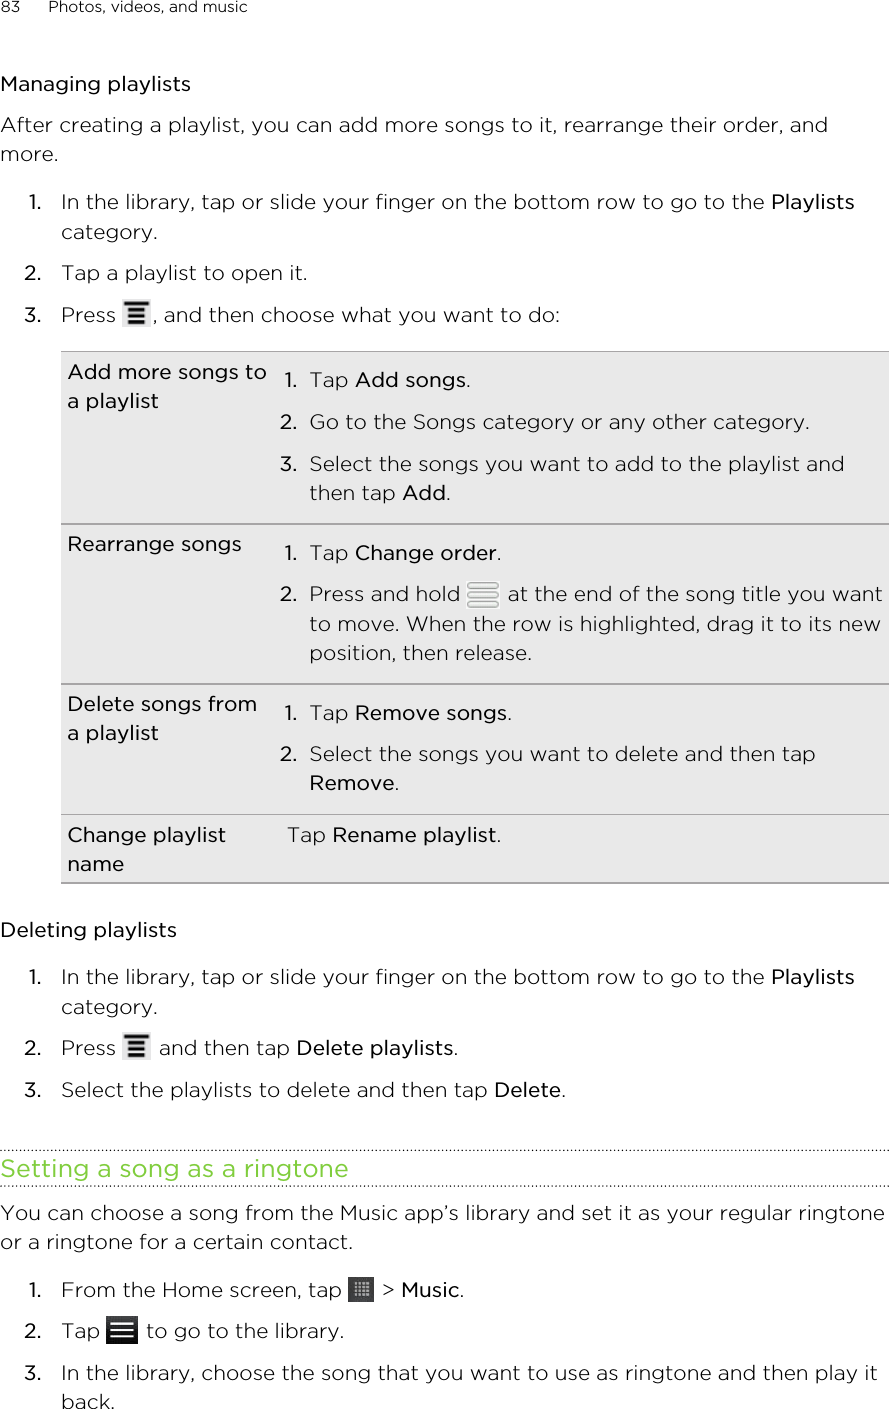 Managing playlistsAfter creating a playlist, you can add more songs to it, rearrange their order, andmore.1. In the library, tap or slide your finger on the bottom row to go to the Playlistscategory.2. Tap a playlist to open it.3. Press  , and then choose what you want to do:Add more songs toa playlist 1. Tap Add songs.2. Go to the Songs category or any other category.3. Select the songs you want to add to the playlist andthen tap Add.Rearrange songs 1. Tap Change order.2. Press and hold   at the end of the song title you wantto move. When the row is highlighted, drag it to its newposition, then release.Delete songs froma playlist 1. Tap Remove songs.2. Select the songs you want to delete and then tapRemove.Change playlistnameTap Rename playlist.Deleting playlists1. In the library, tap or slide your finger on the bottom row to go to the Playlistscategory.2. Press   and then tap Delete playlists.3. Select the playlists to delete and then tap Delete.Setting a song as a ringtoneYou can choose a song from the Music app’s library and set it as your regular ringtoneor a ringtone for a certain contact.1. From the Home screen, tap   &gt; Music.2. Tap   to go to the library.3. In the library, choose the song that you want to use as ringtone and then play itback.83 Photos, videos, and music